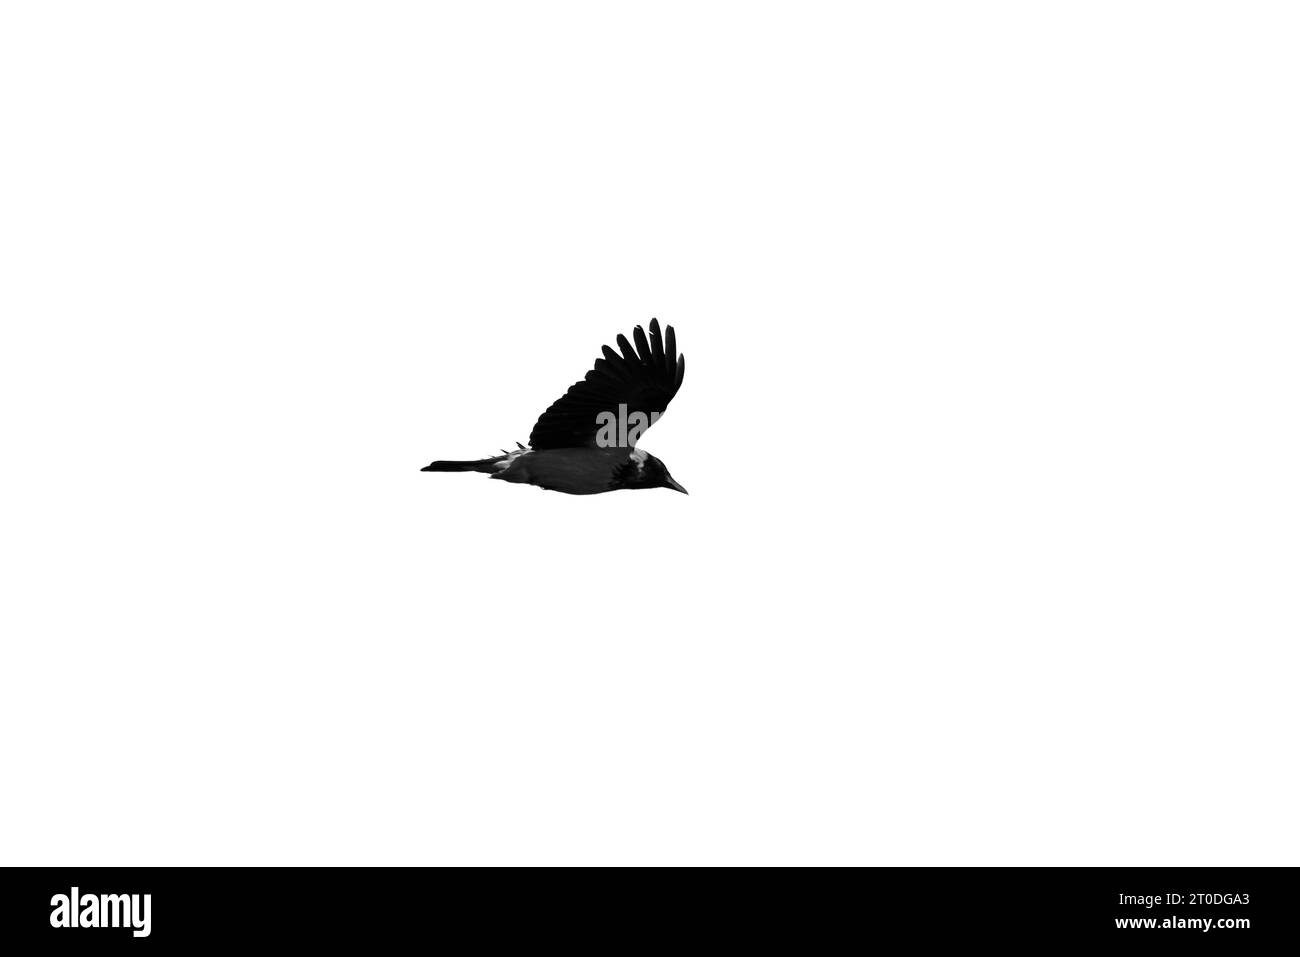 Black crow flies in the sky, close-up photo isolated on white background Stock Photo